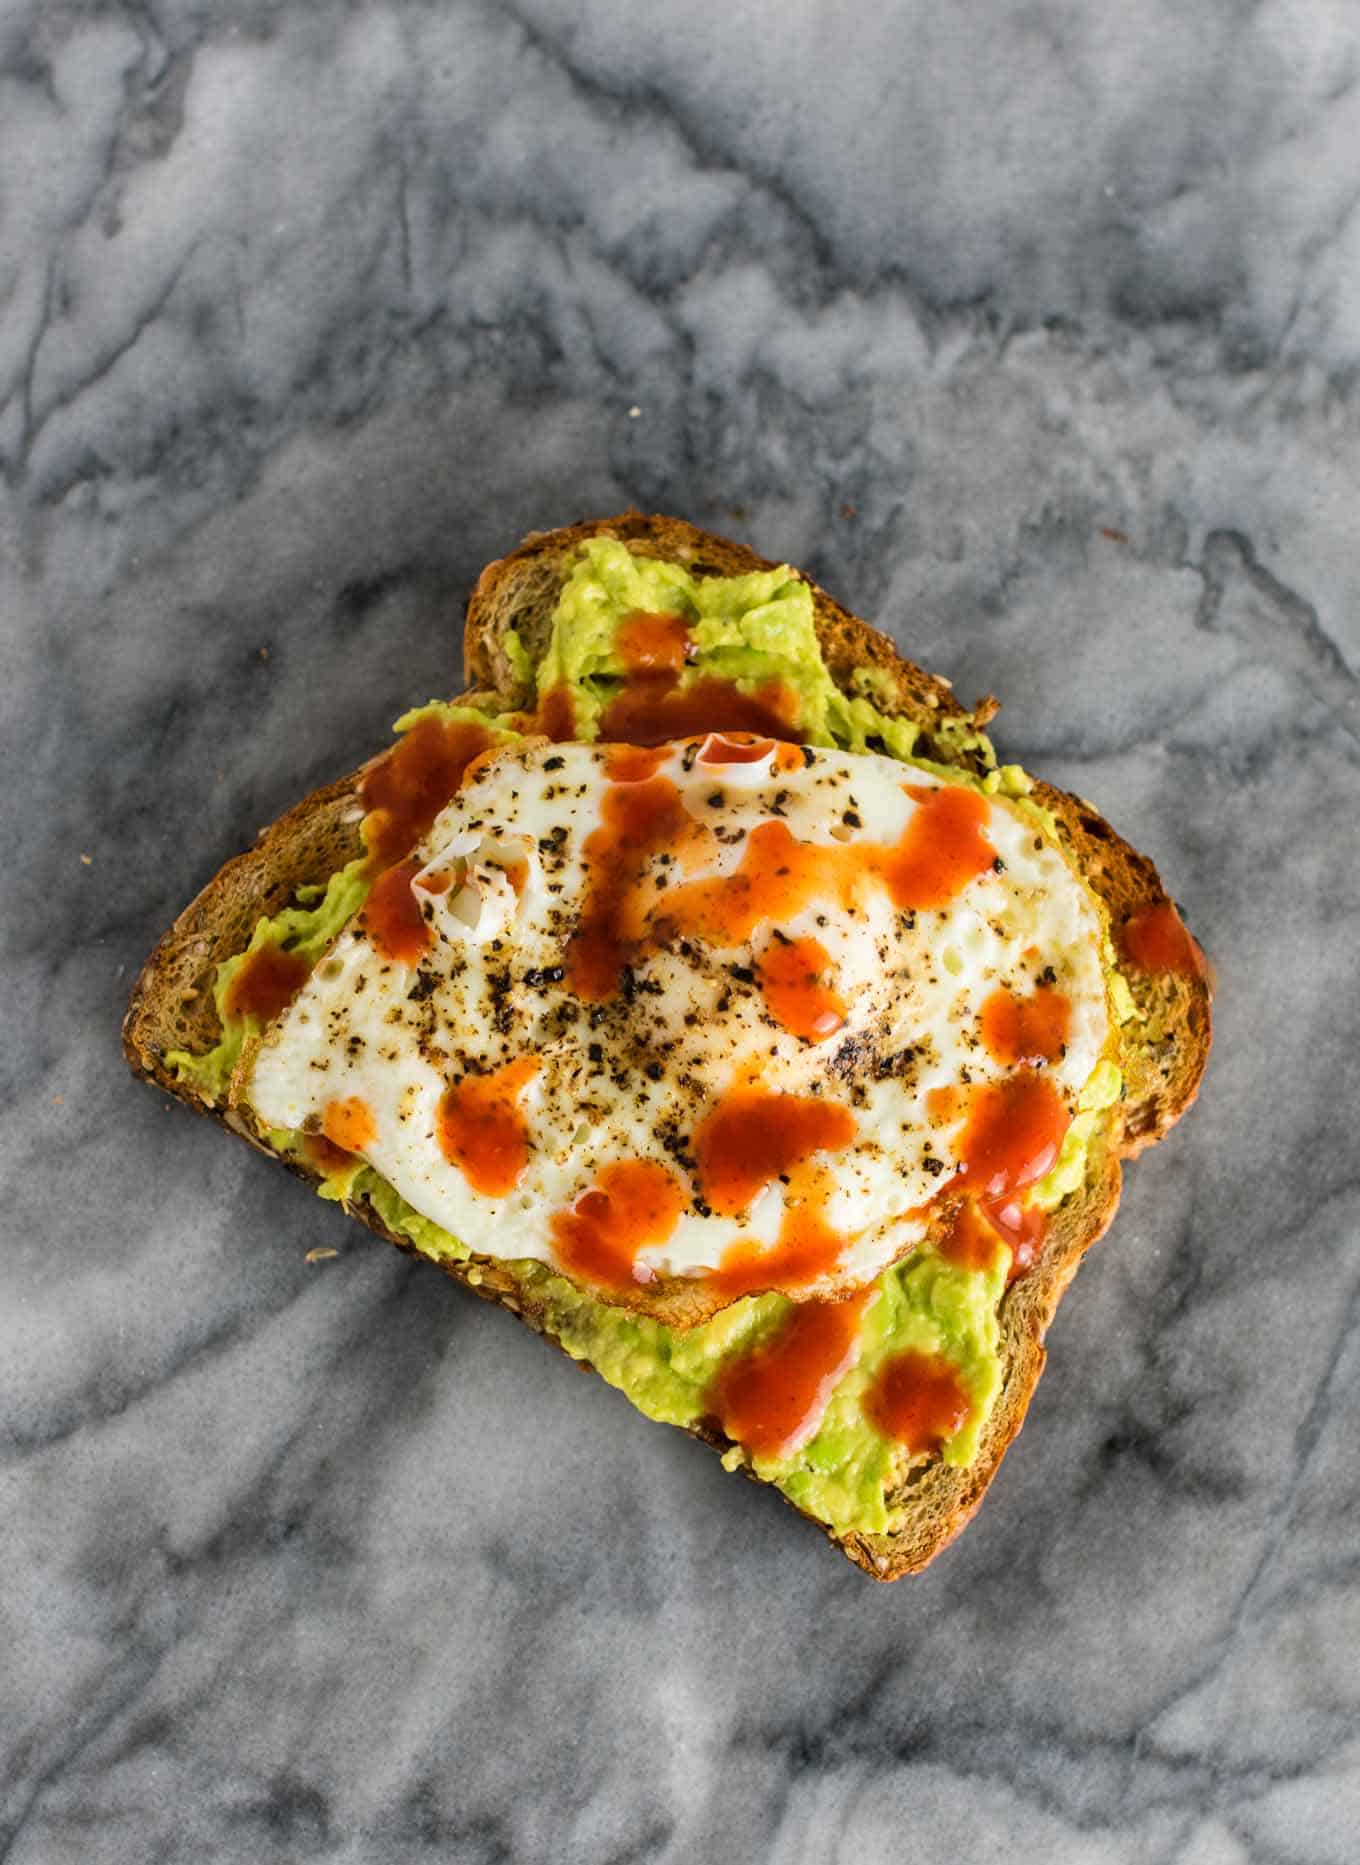 Spicy Avocado Egg Toast - really easy but so delicious. I make this all the time! #breakfast #avocadotoast #eggs #vegetarian #meatless